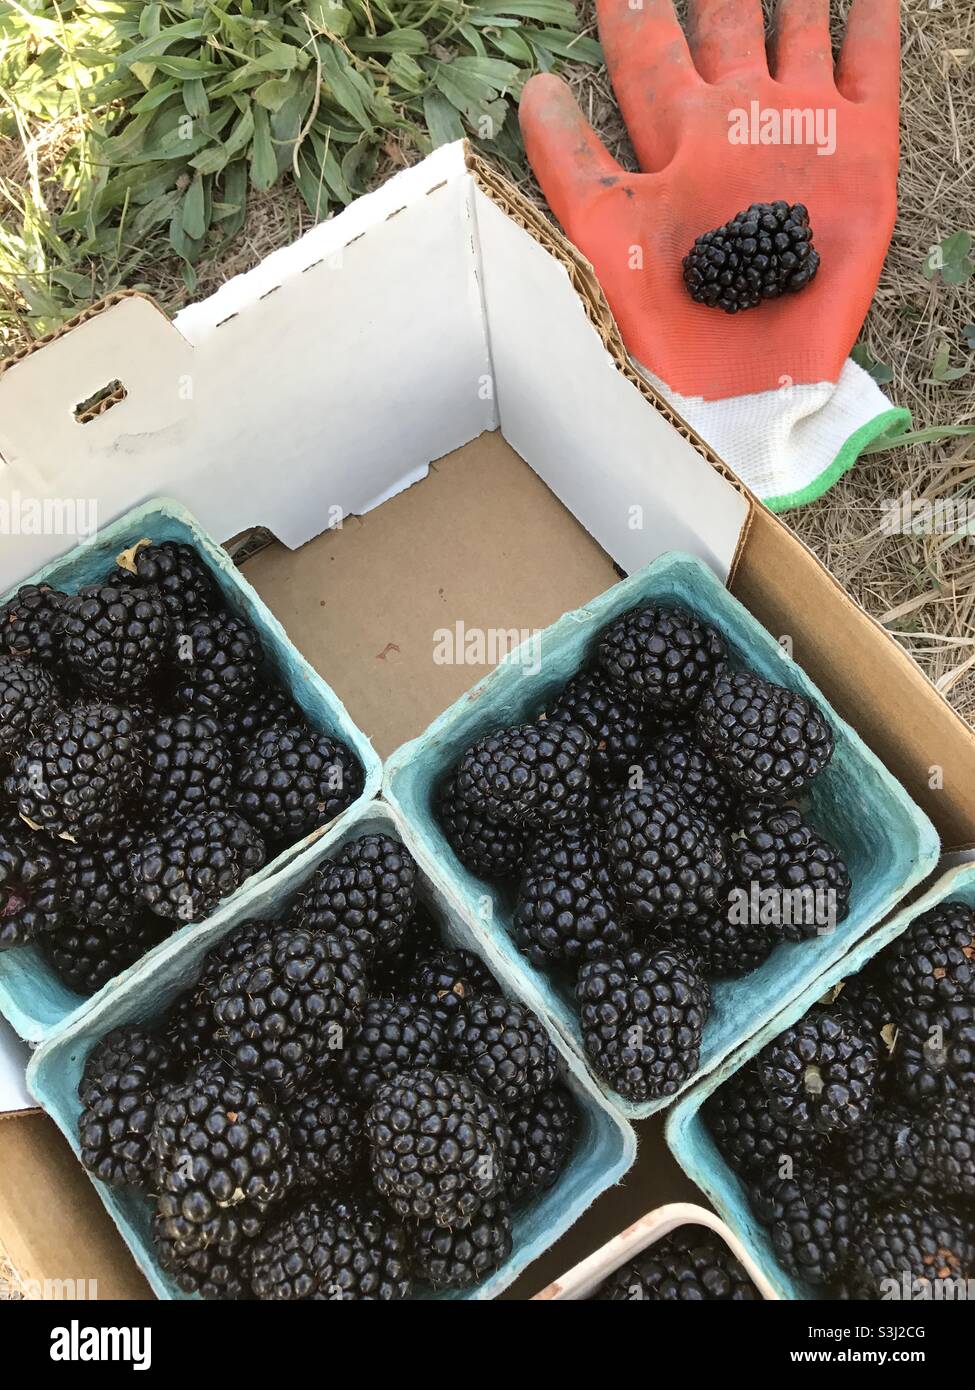 Fresh berries after harvest. Stock Photo